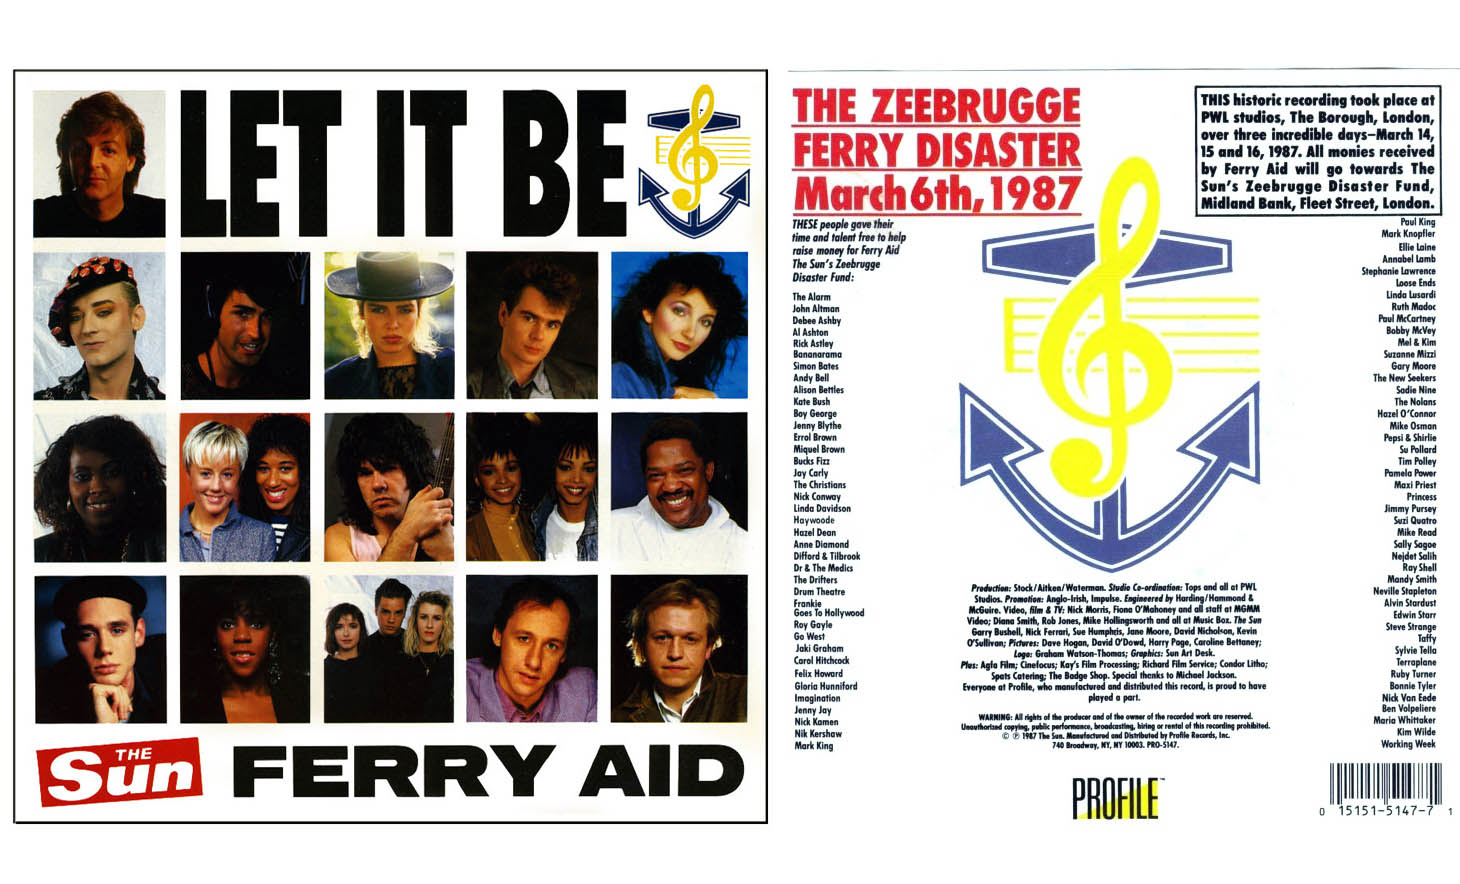 Let it be - Ferry Aid